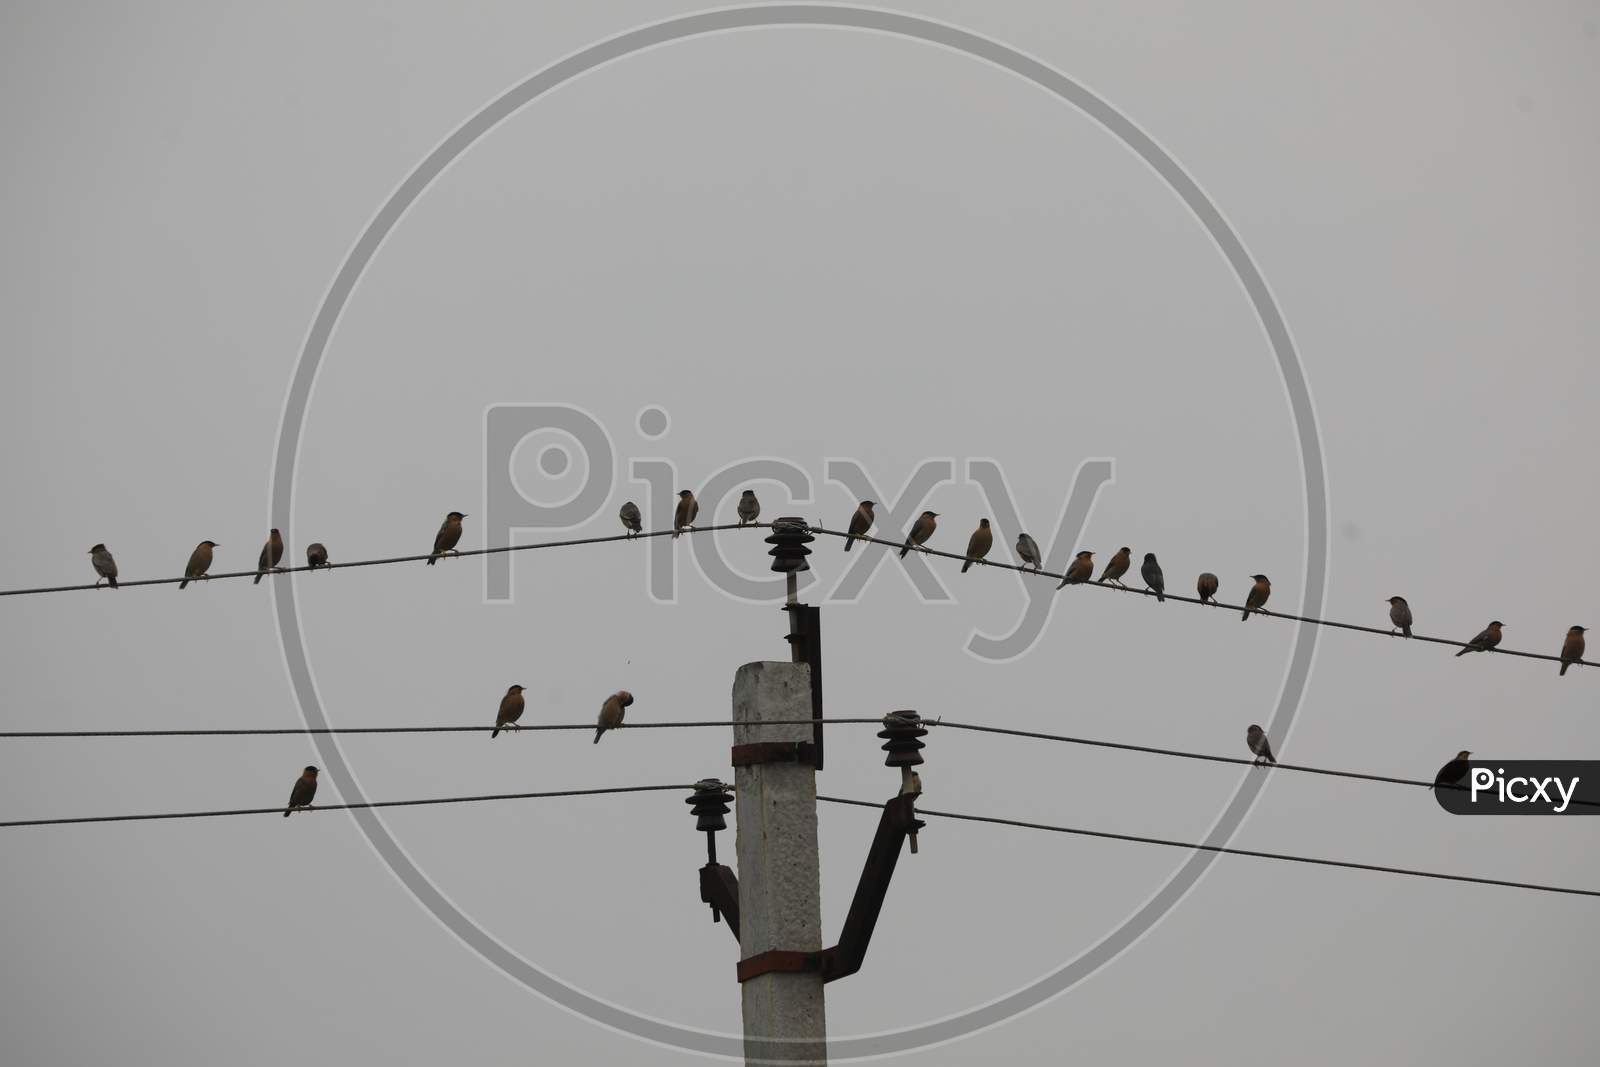 Crows on the Power Cable